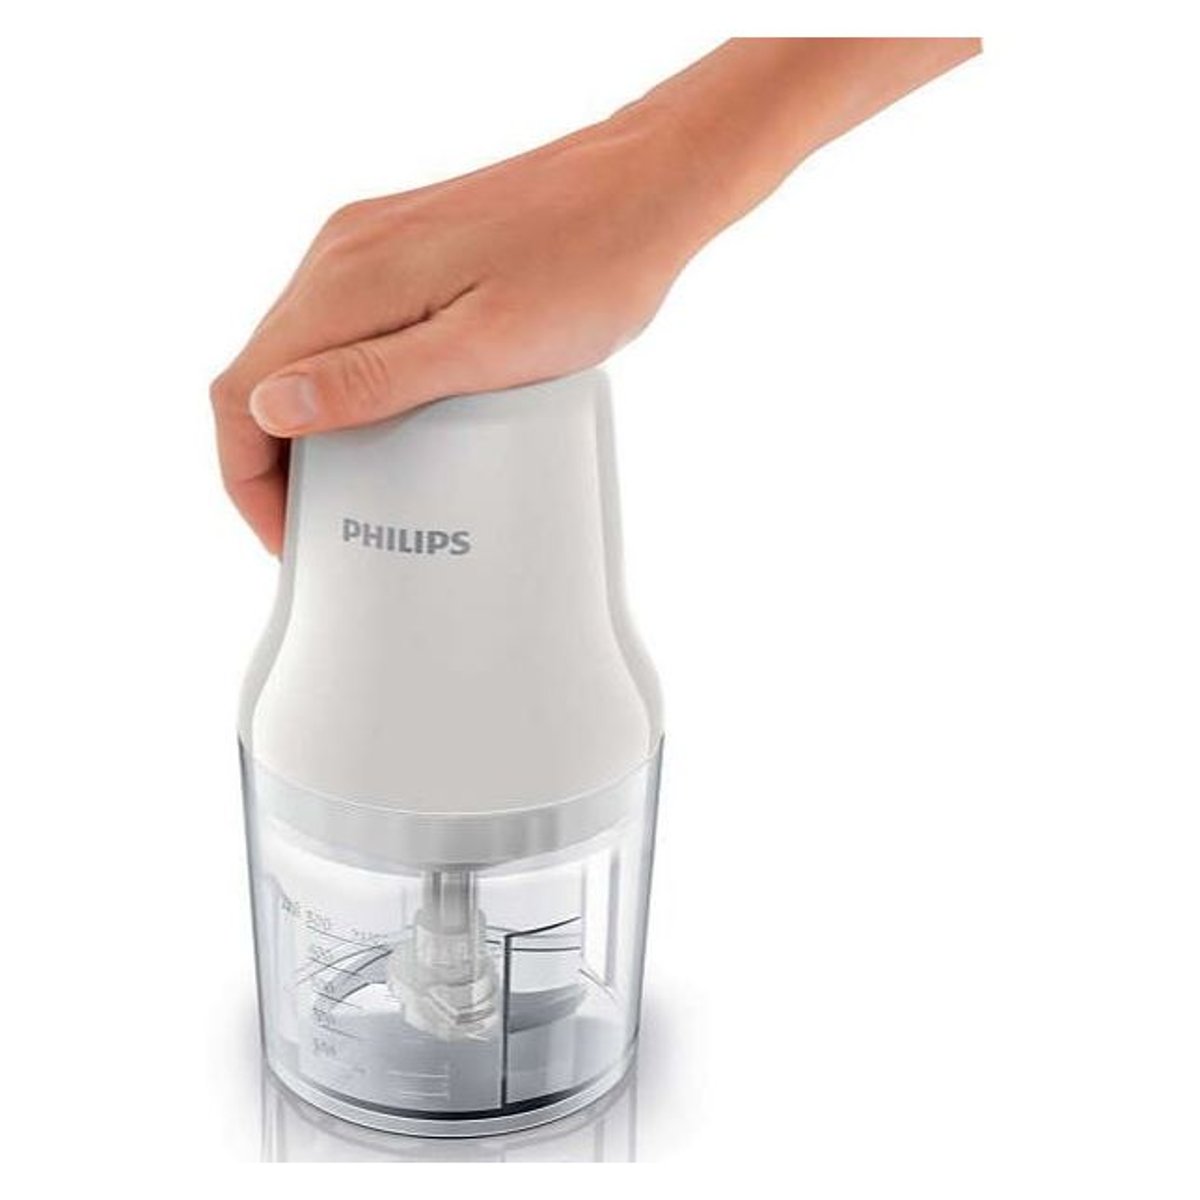 https://yaquby.com/wp-content/uploads/2022/10/PHILIPS-HR1393.jpg